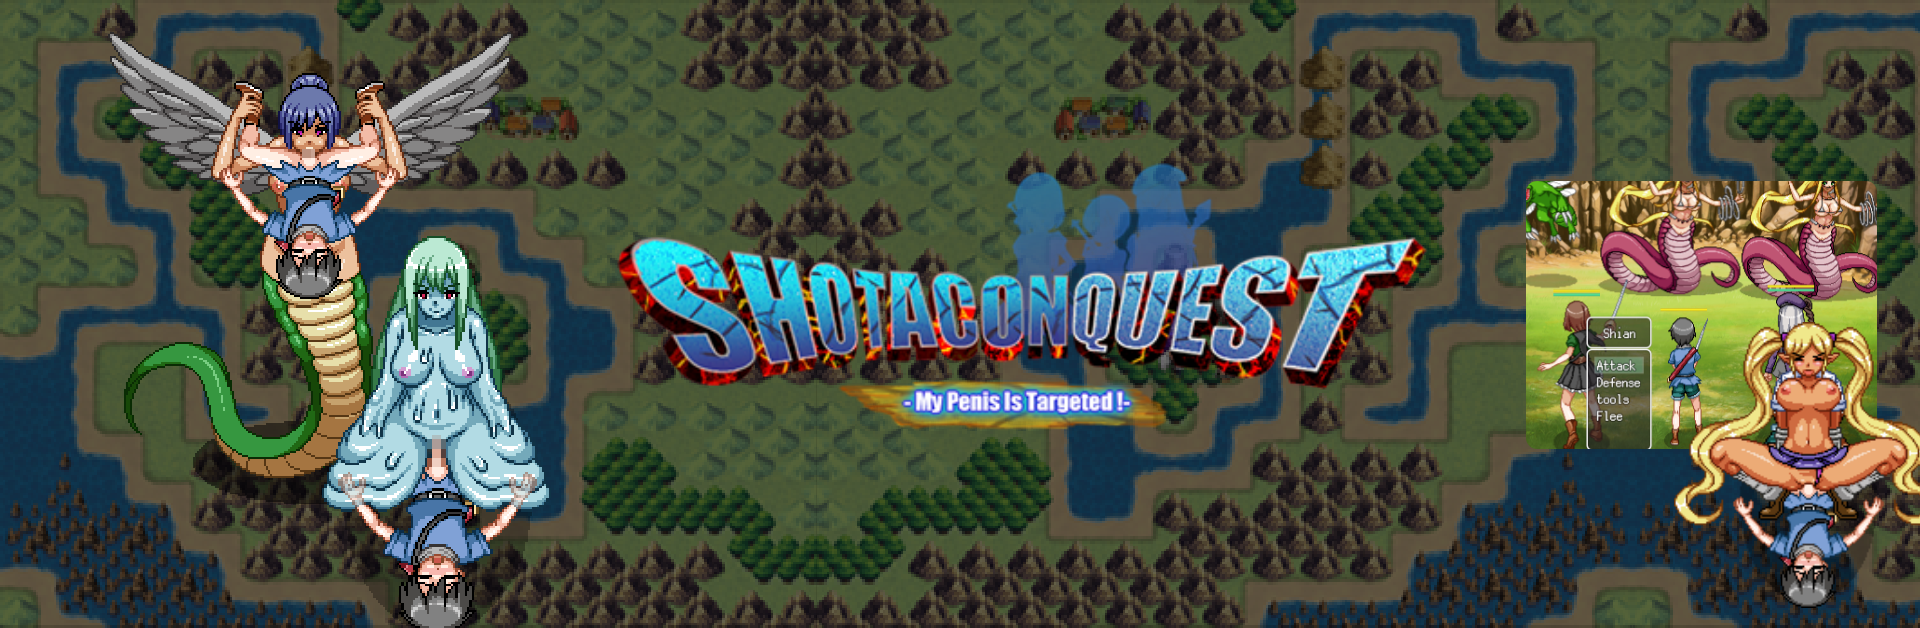 Shotacon Quest -My Penis Is Targeted!-